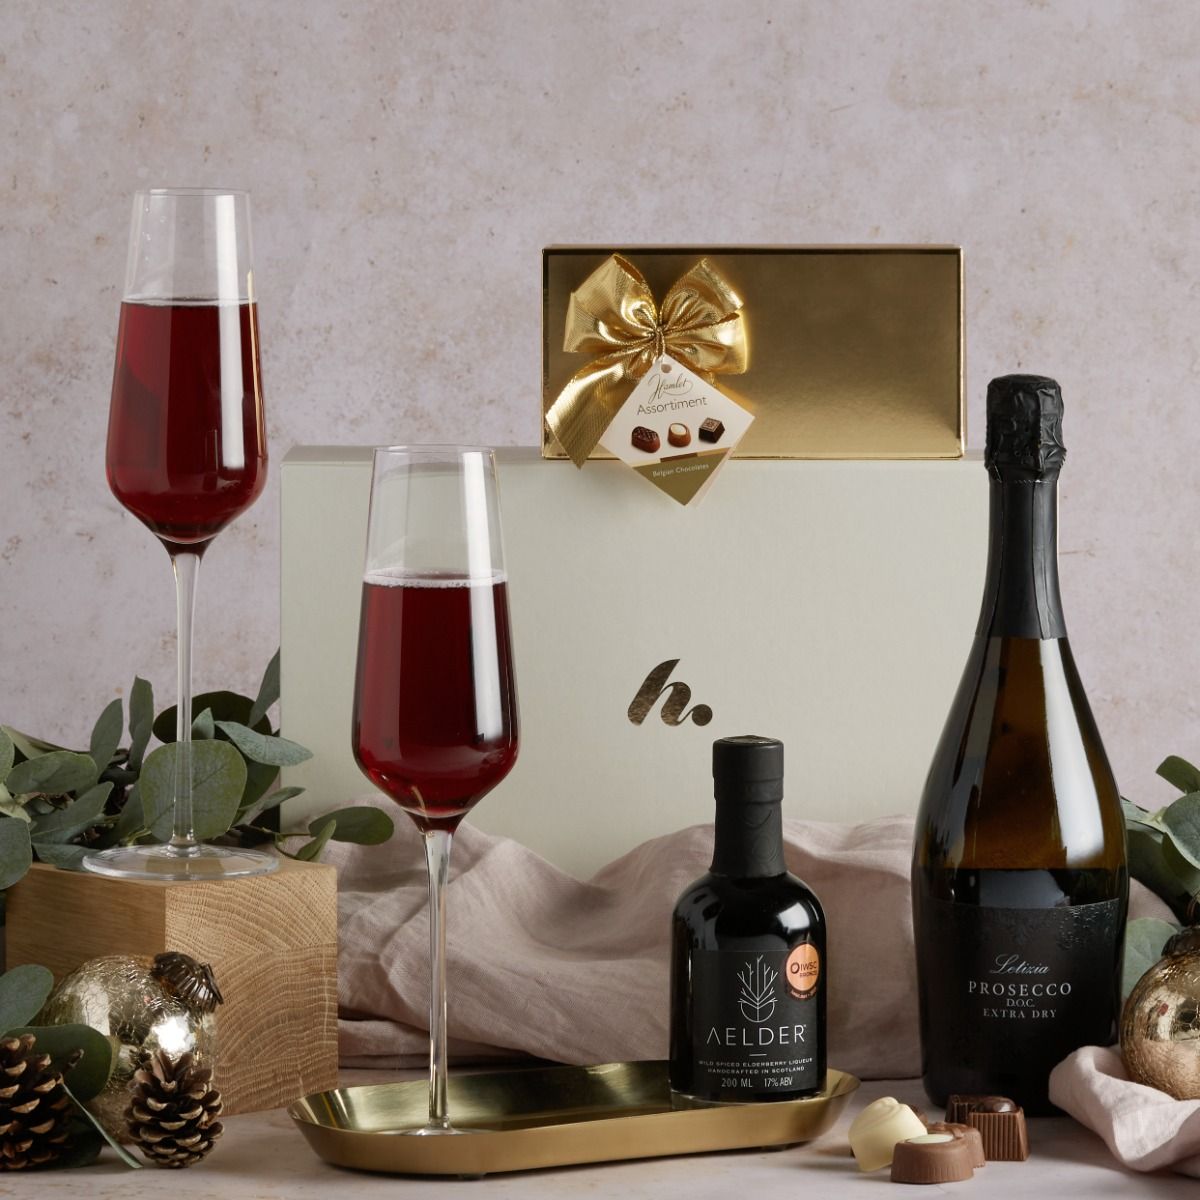 Bottle of Prosecco and Aelder elixir with glasses showing them combined in a unique version of kir royale